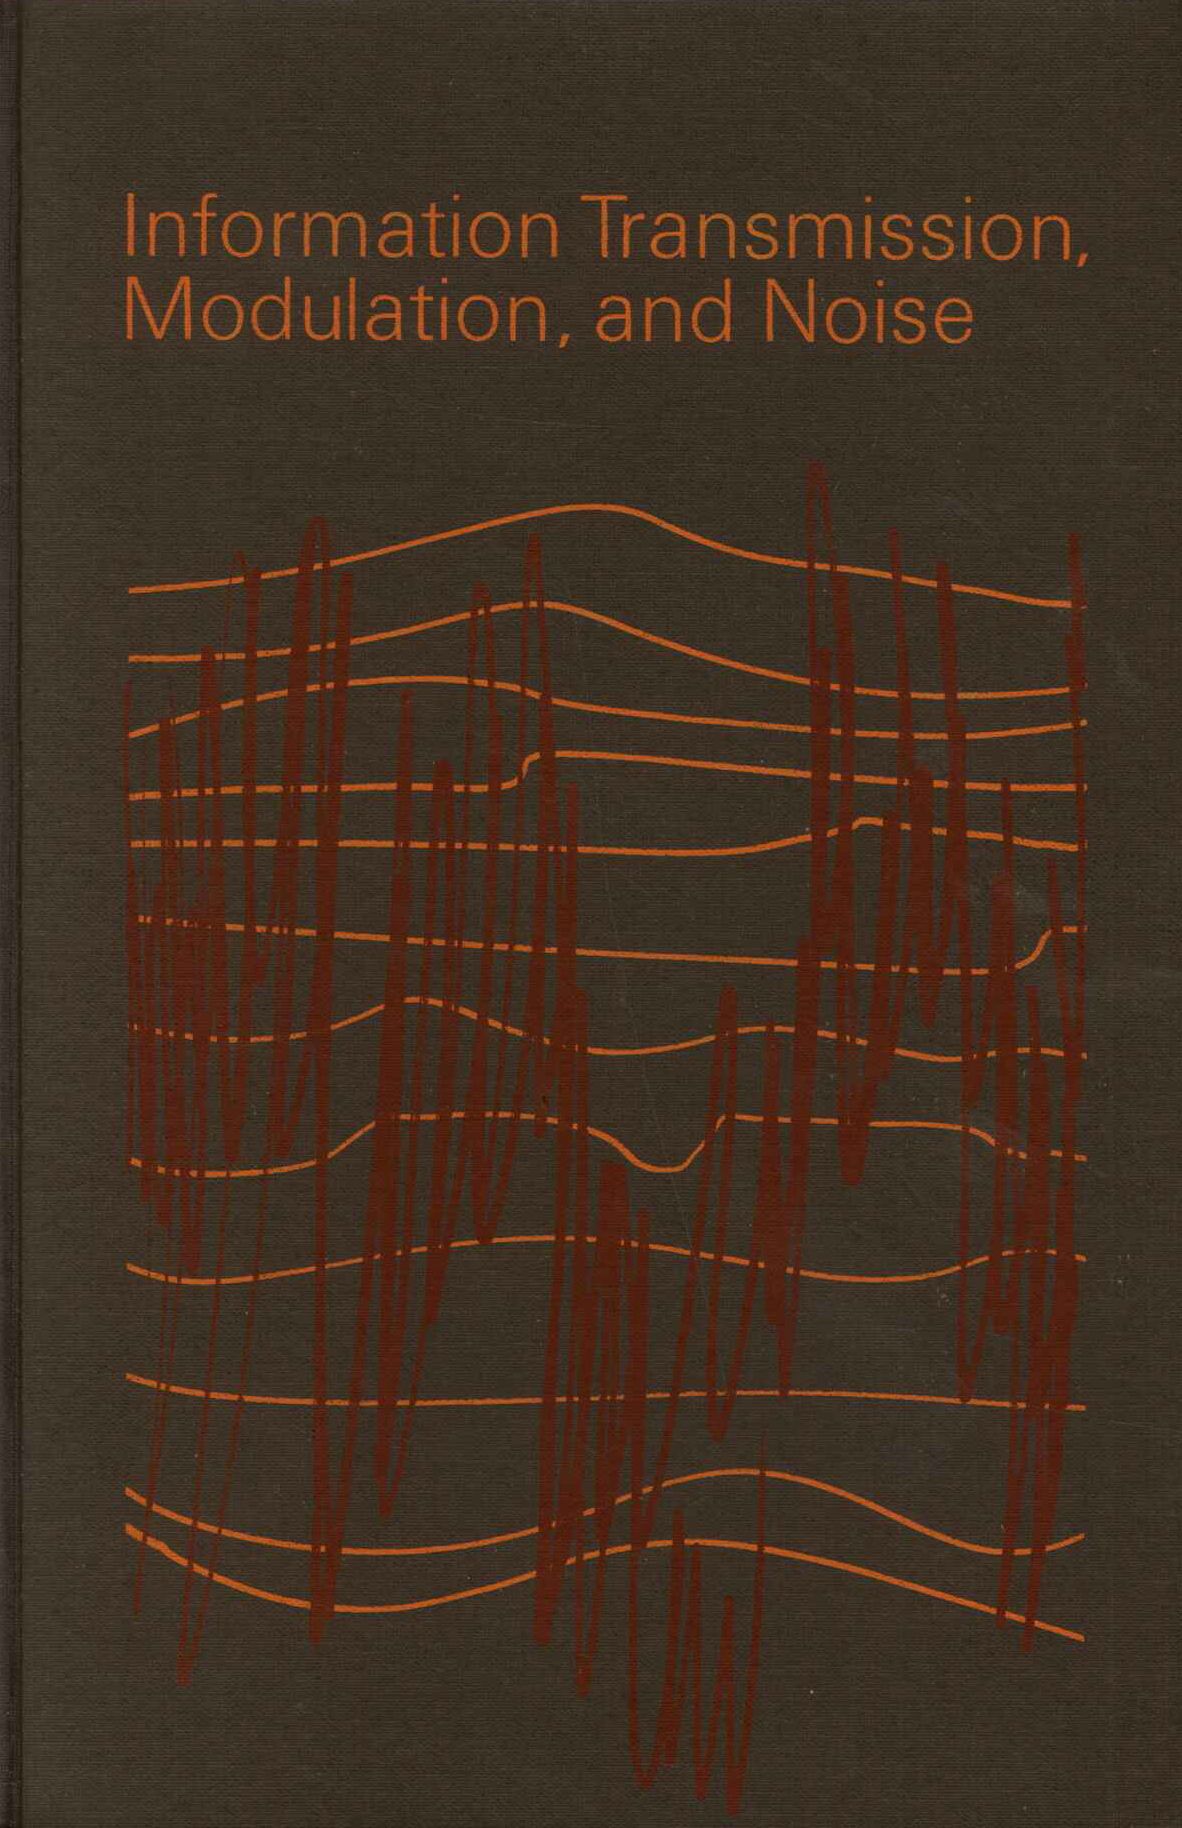 Information Transmission, Modulation and Noise